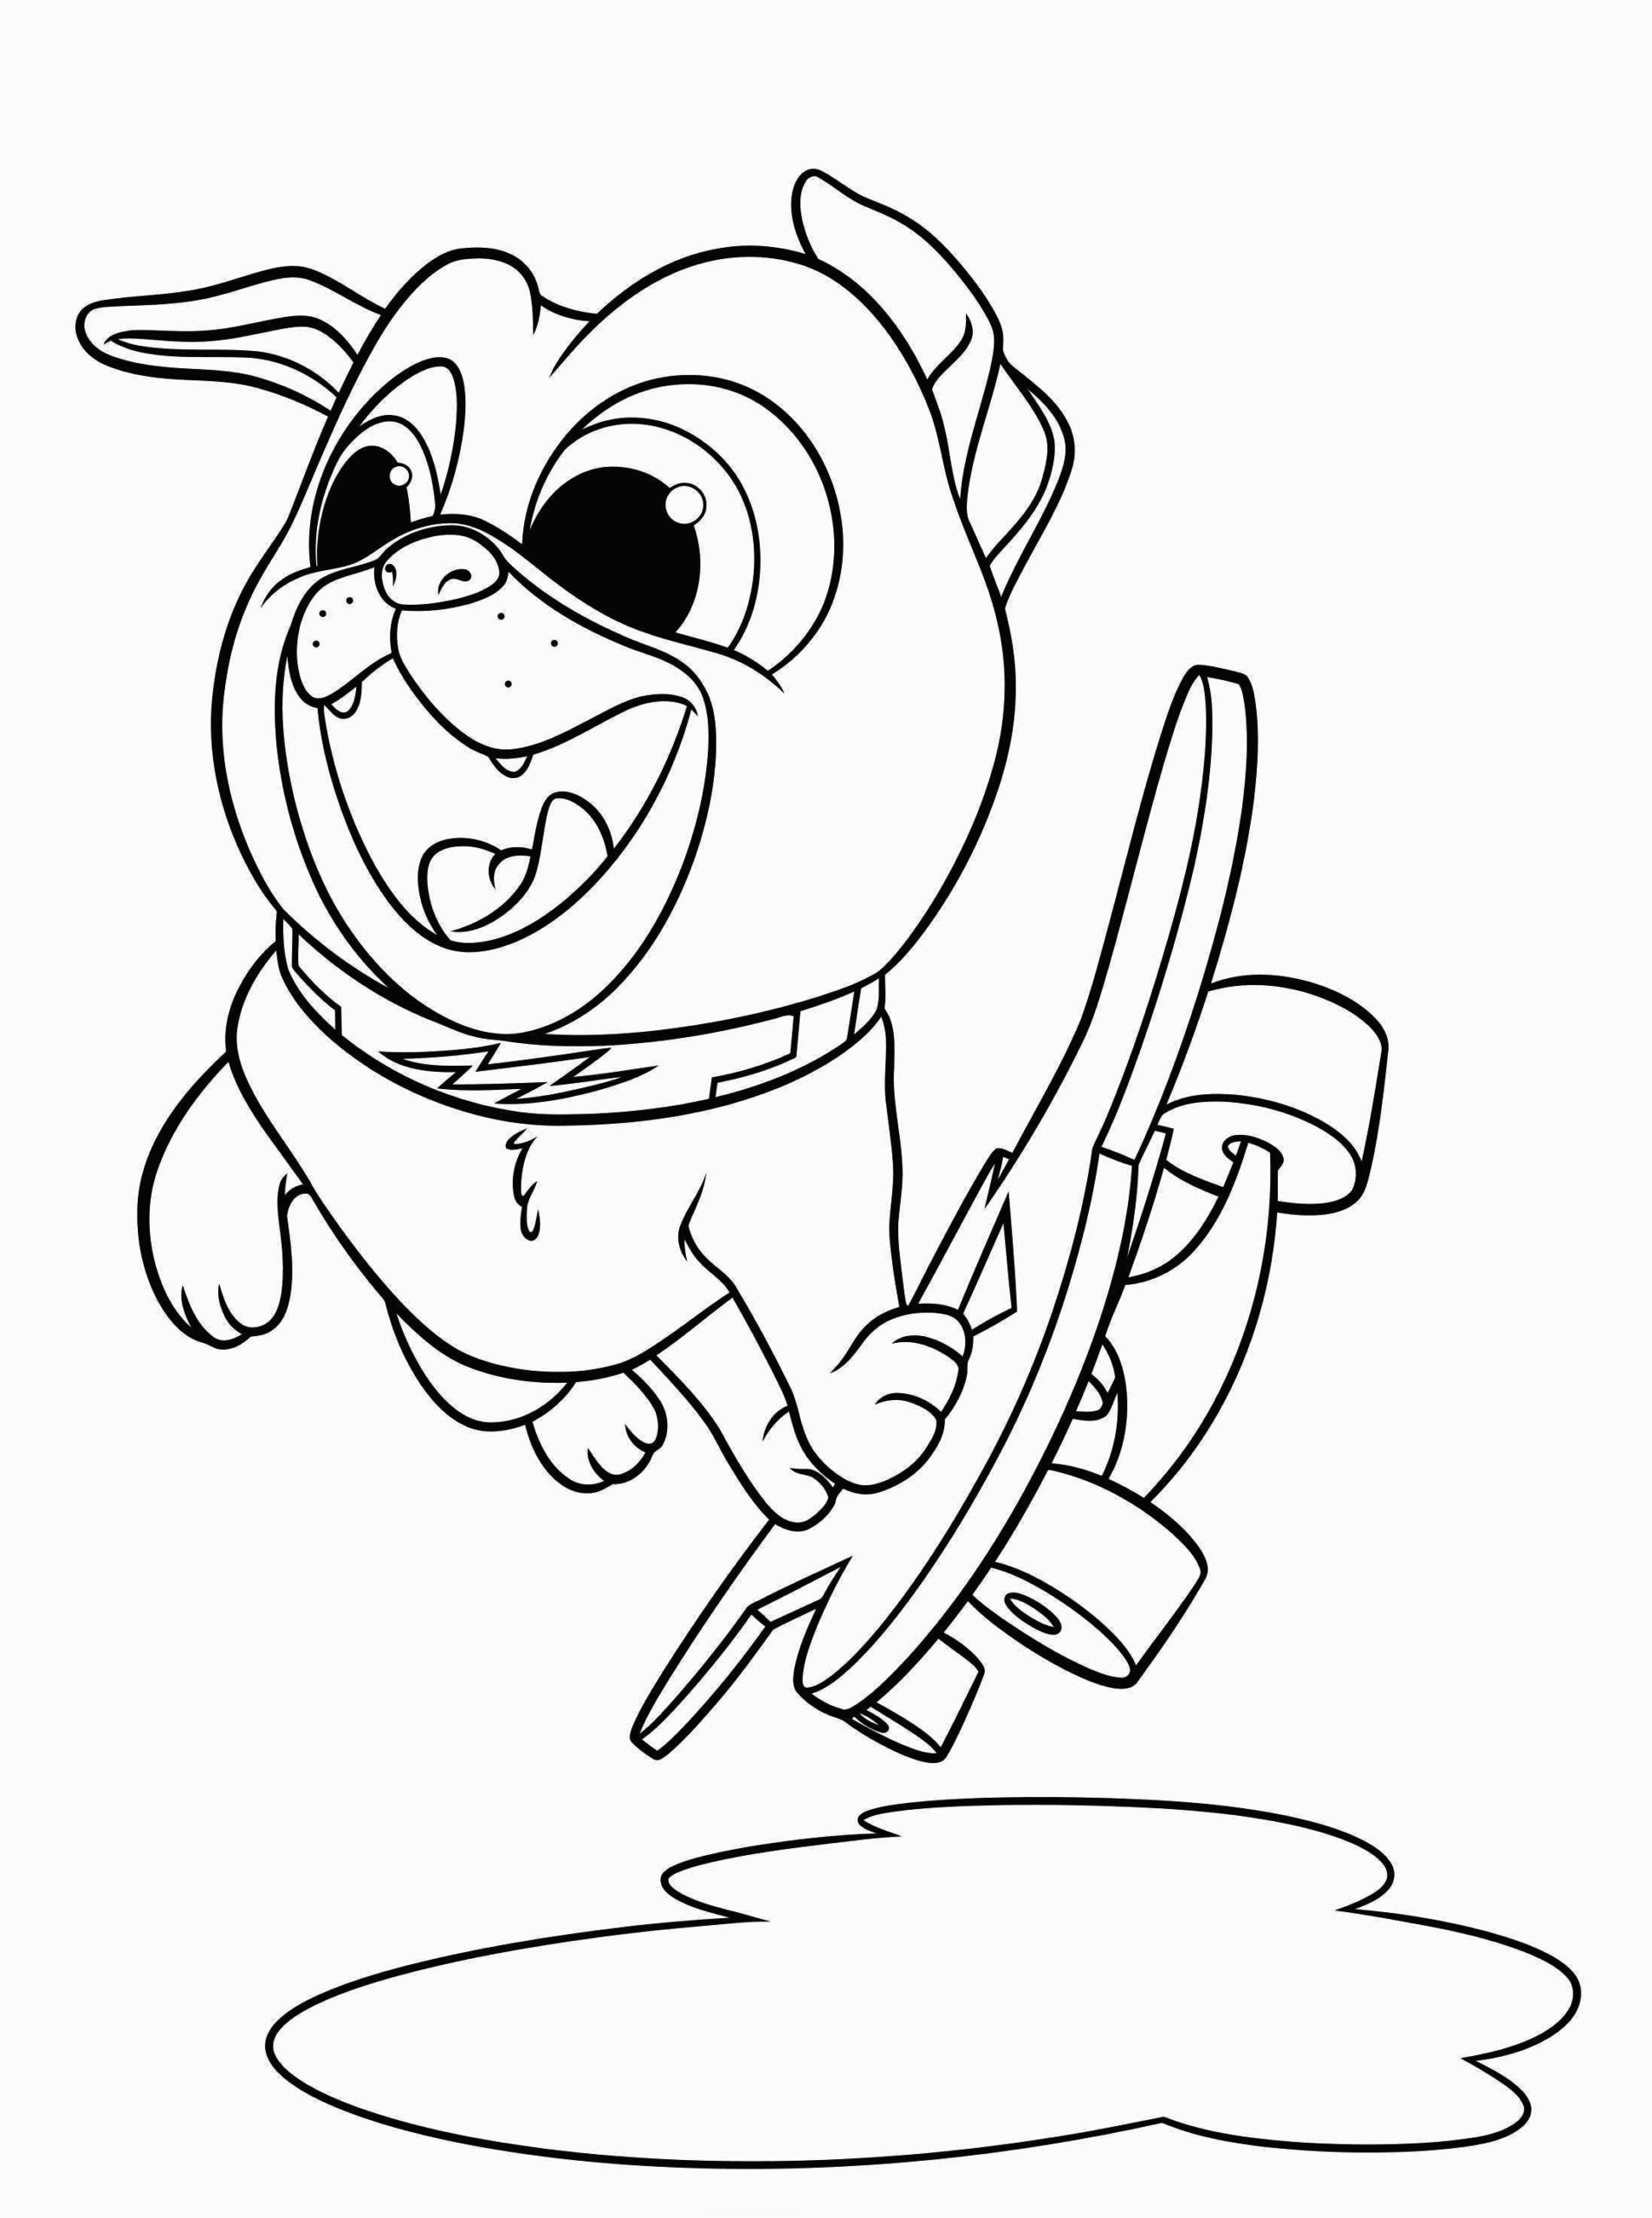 Puppy Dog Pals Coloring Pages Best Coloring Pages For Kids